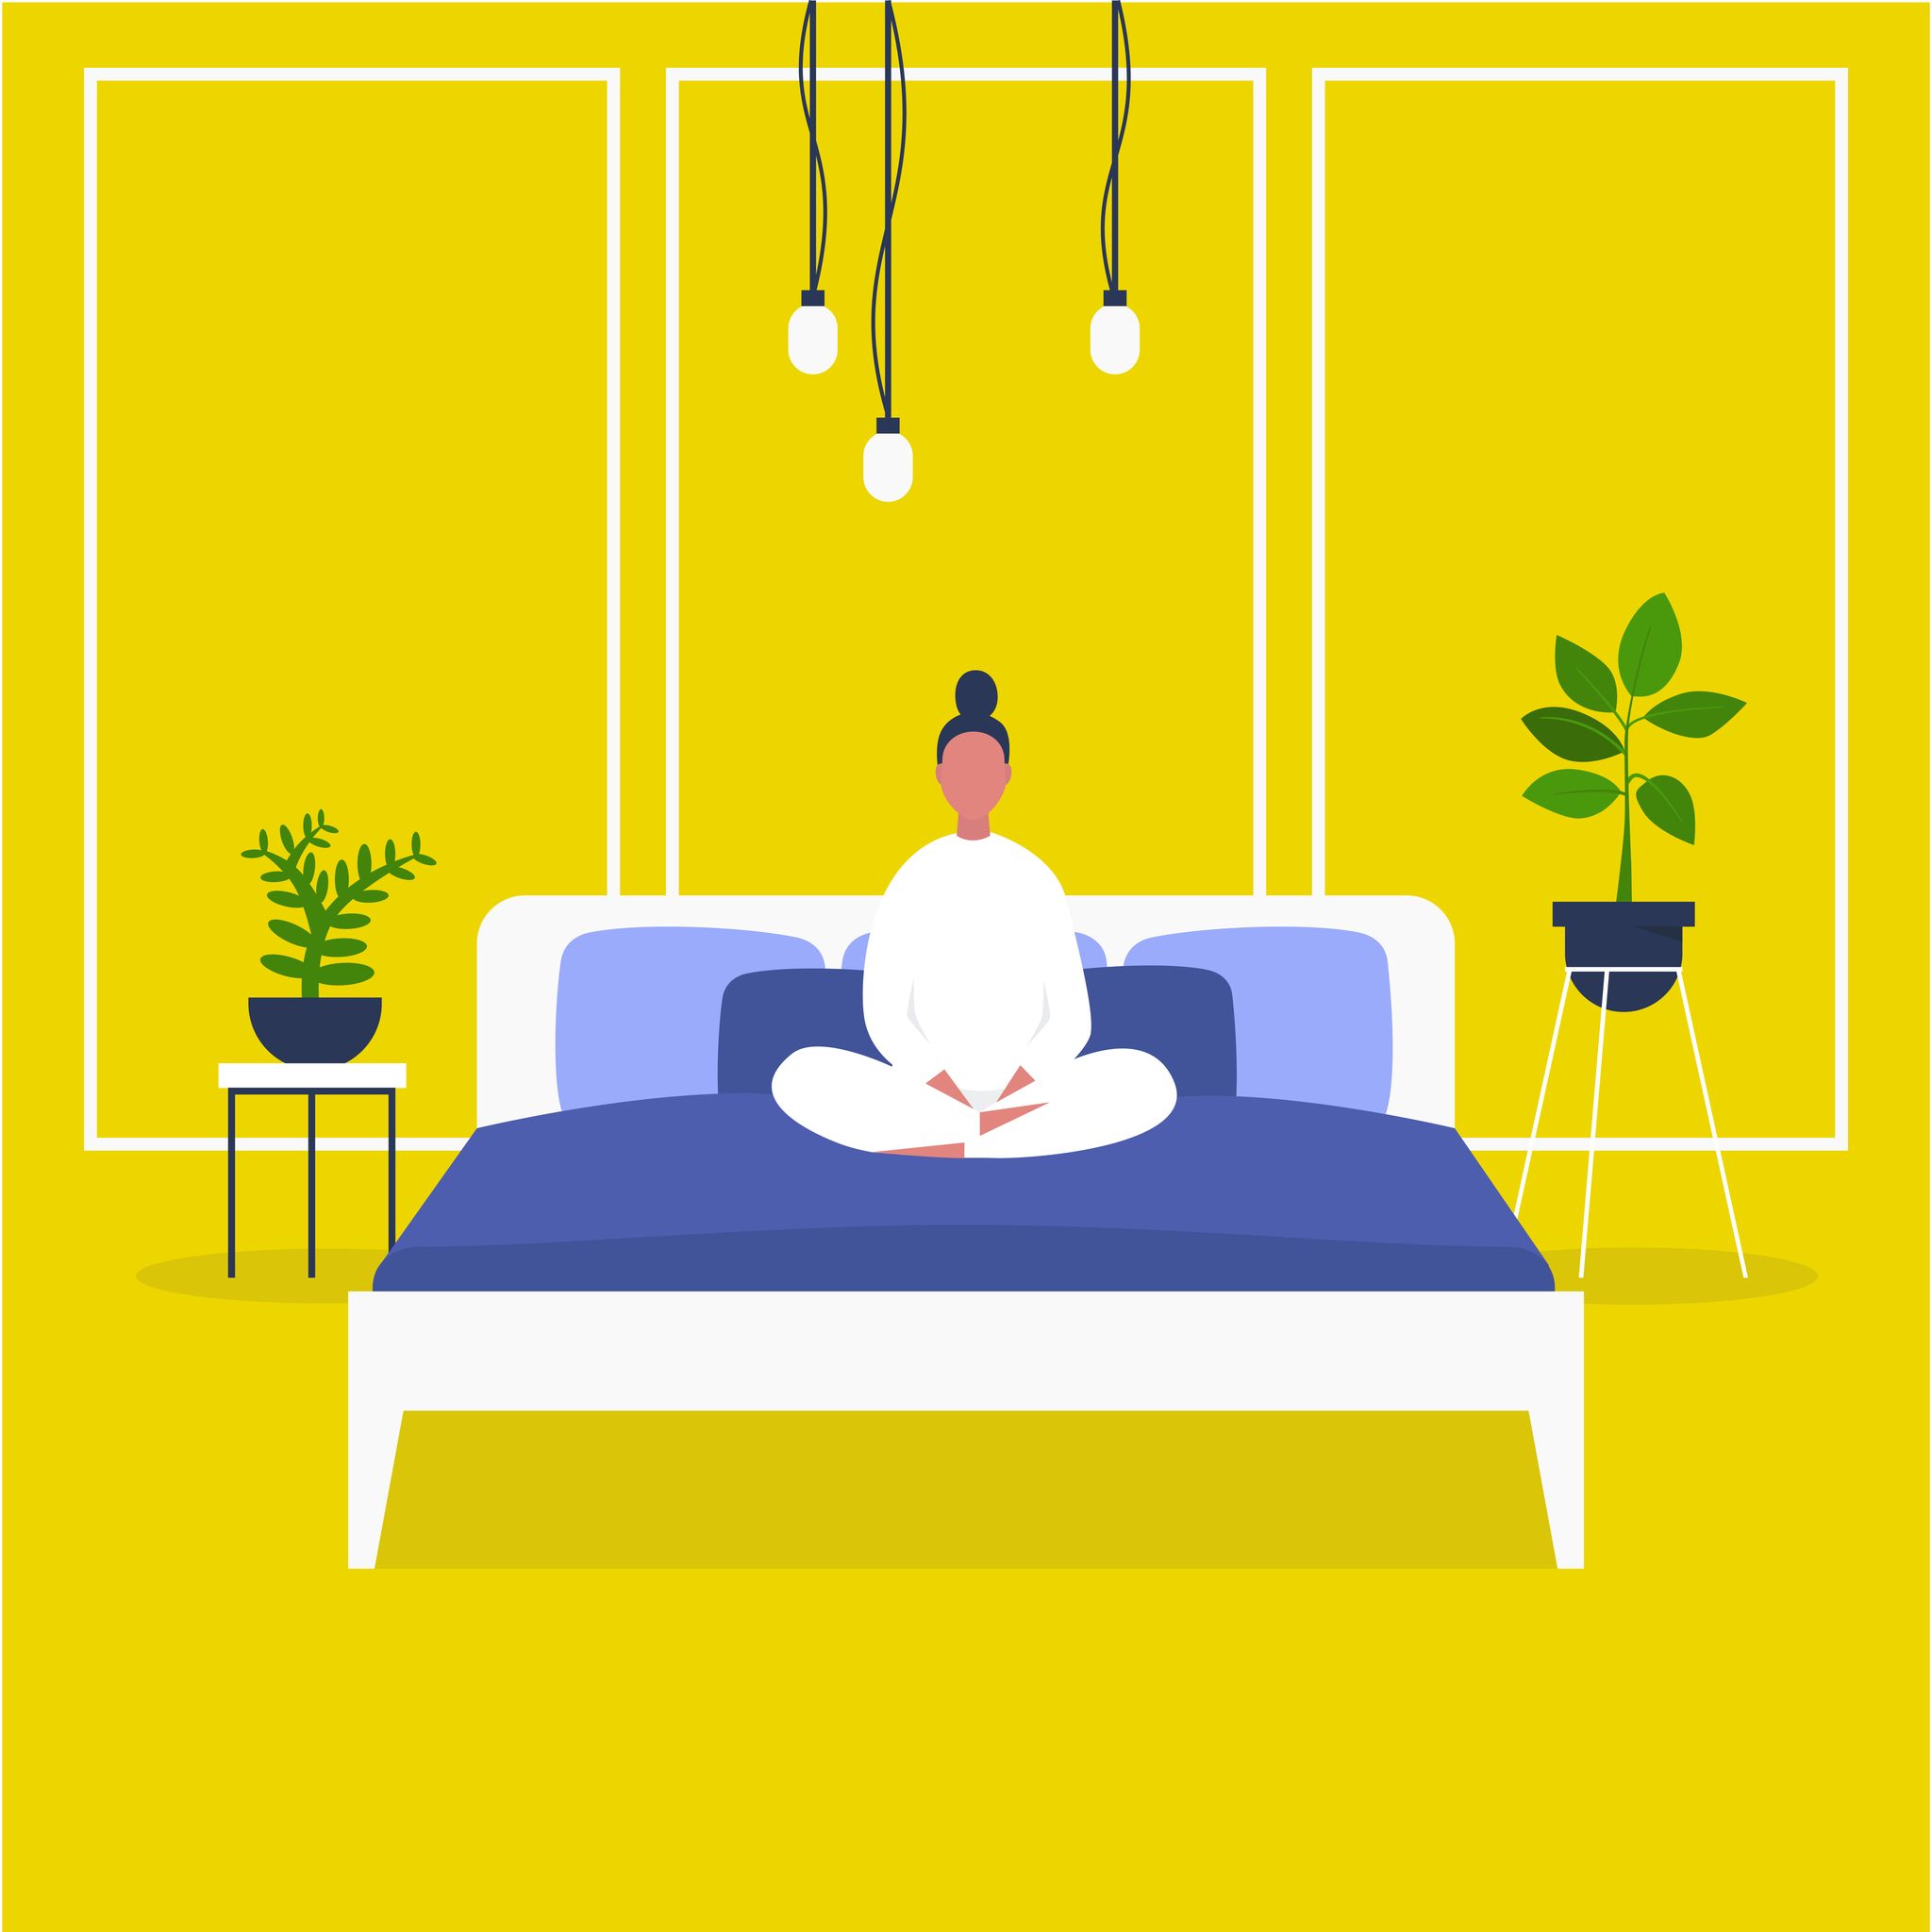 morning wake up female character sitting in bed bedroom front view early bird flat editable vector illustration, clip art millennial lifestyle